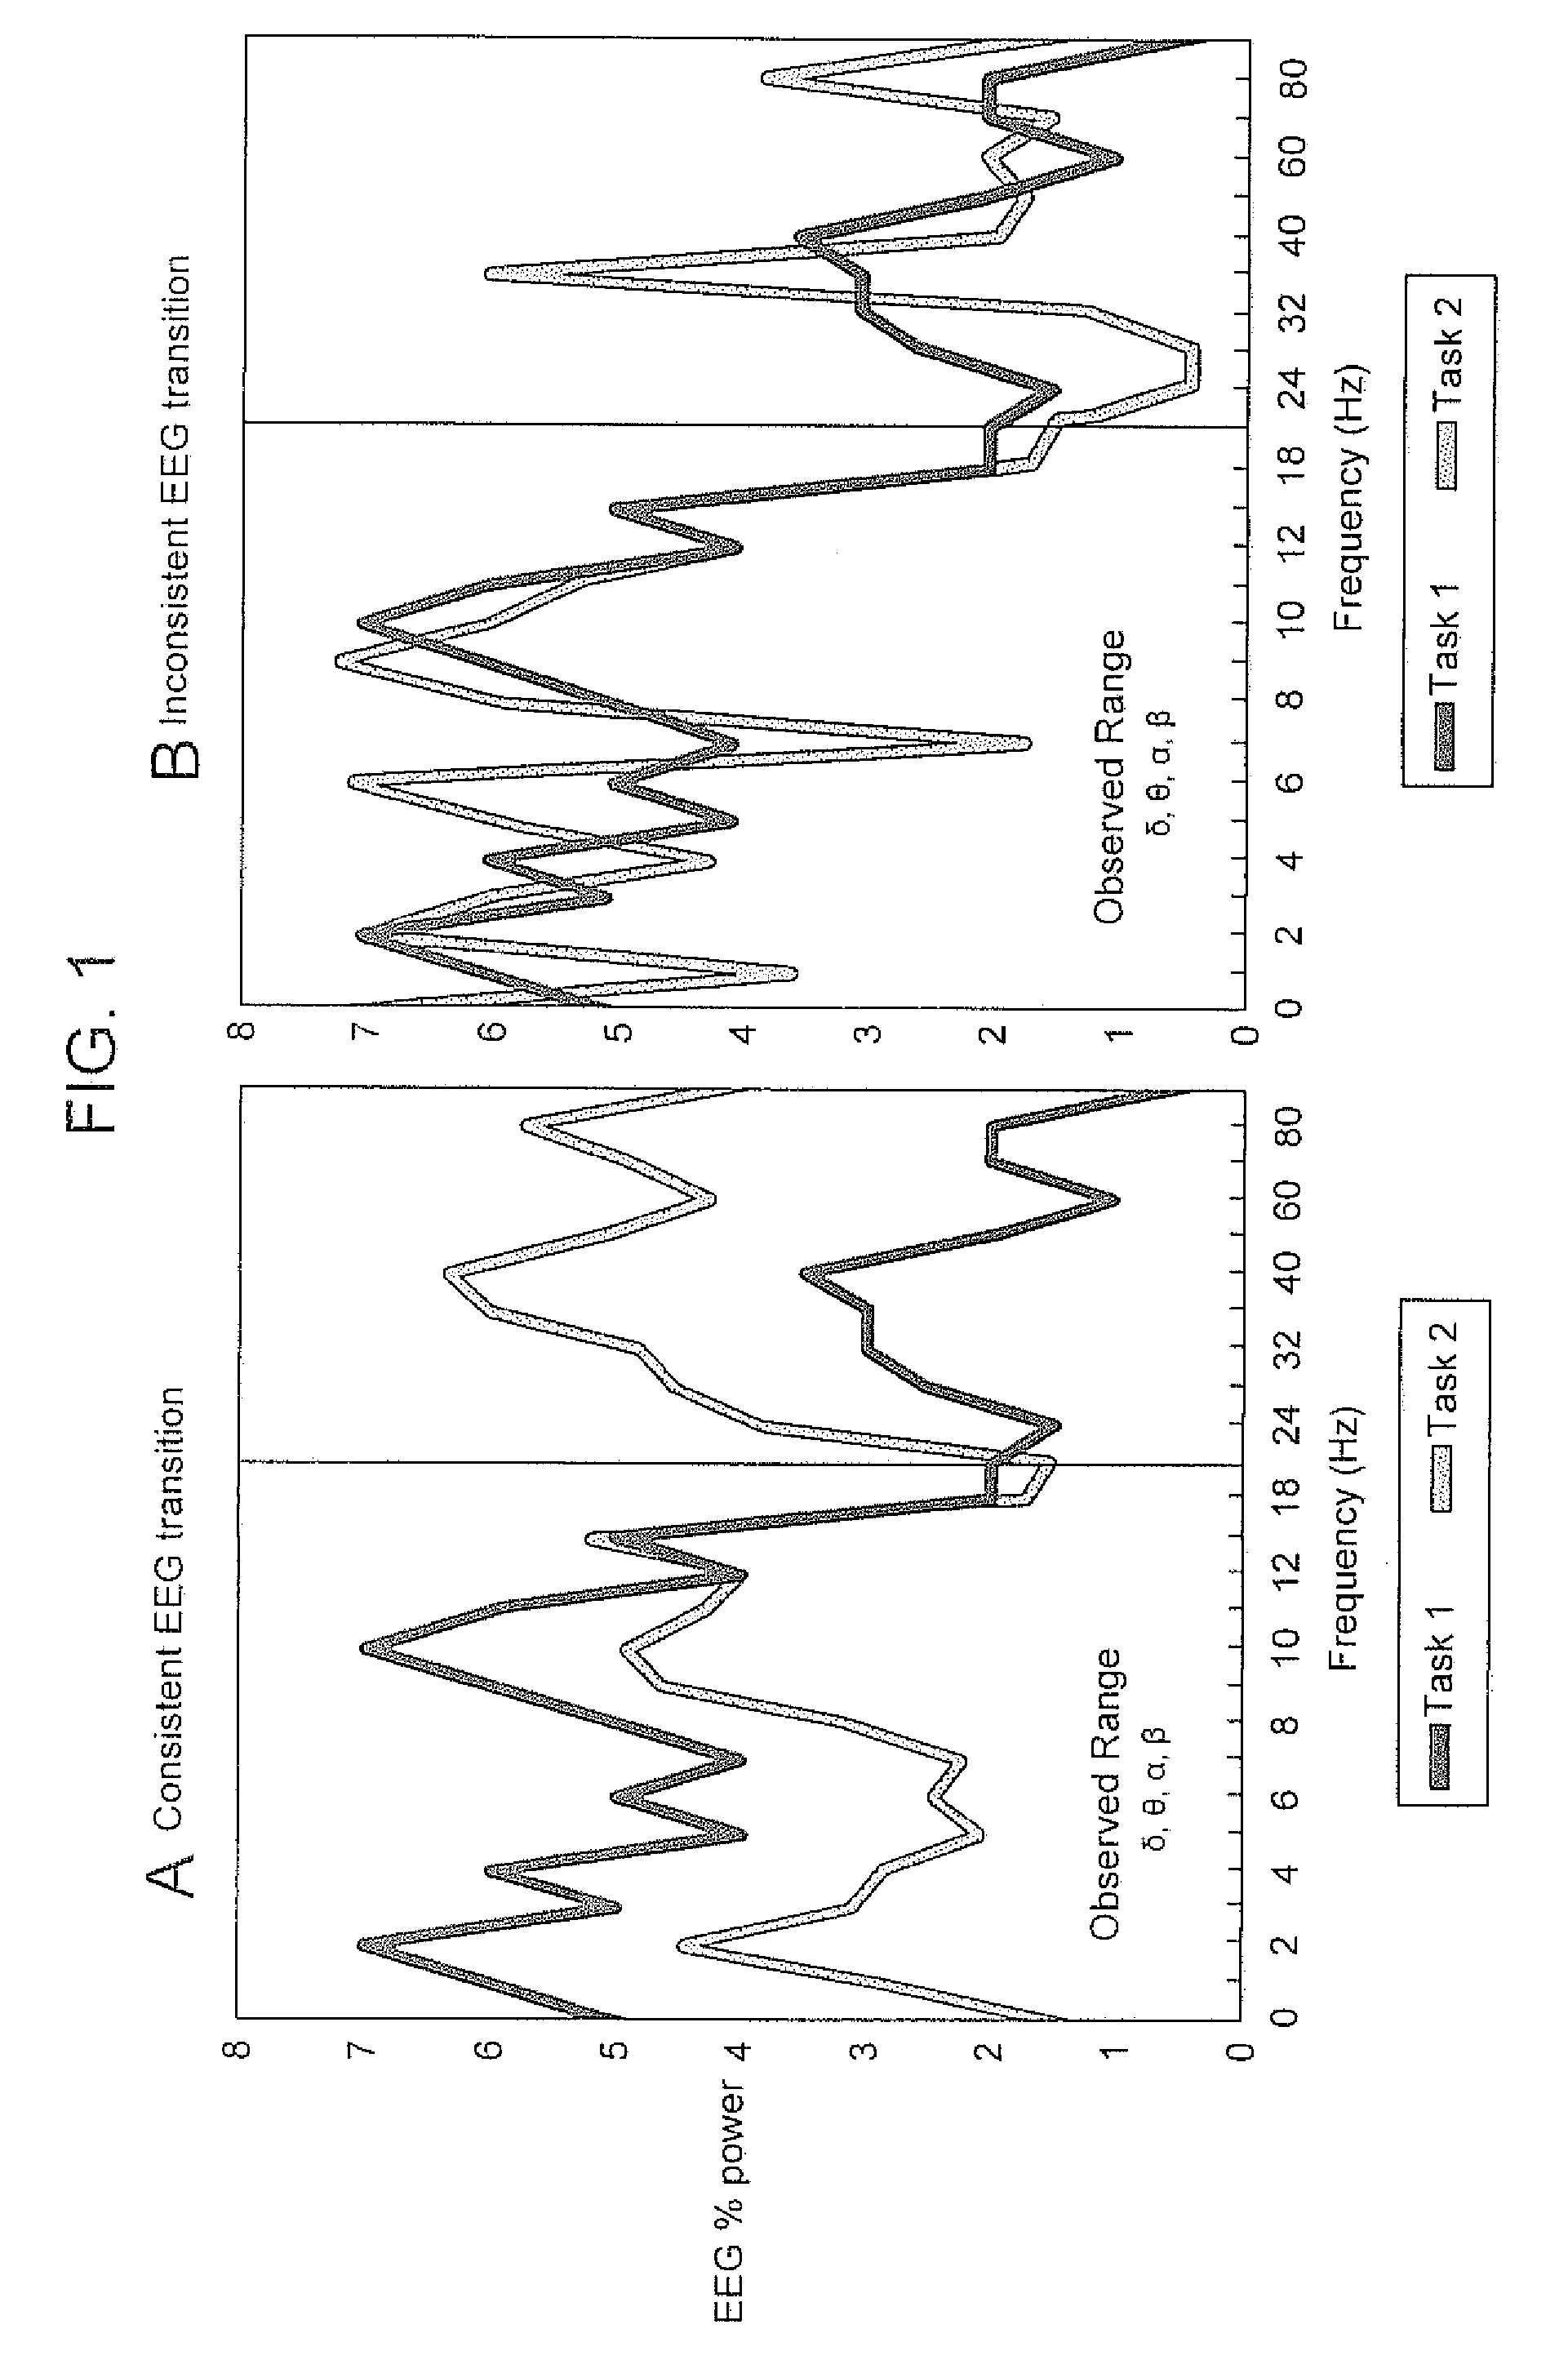 Method, Apparatus and Computer Program Product For Assessment of Attentional Impairments